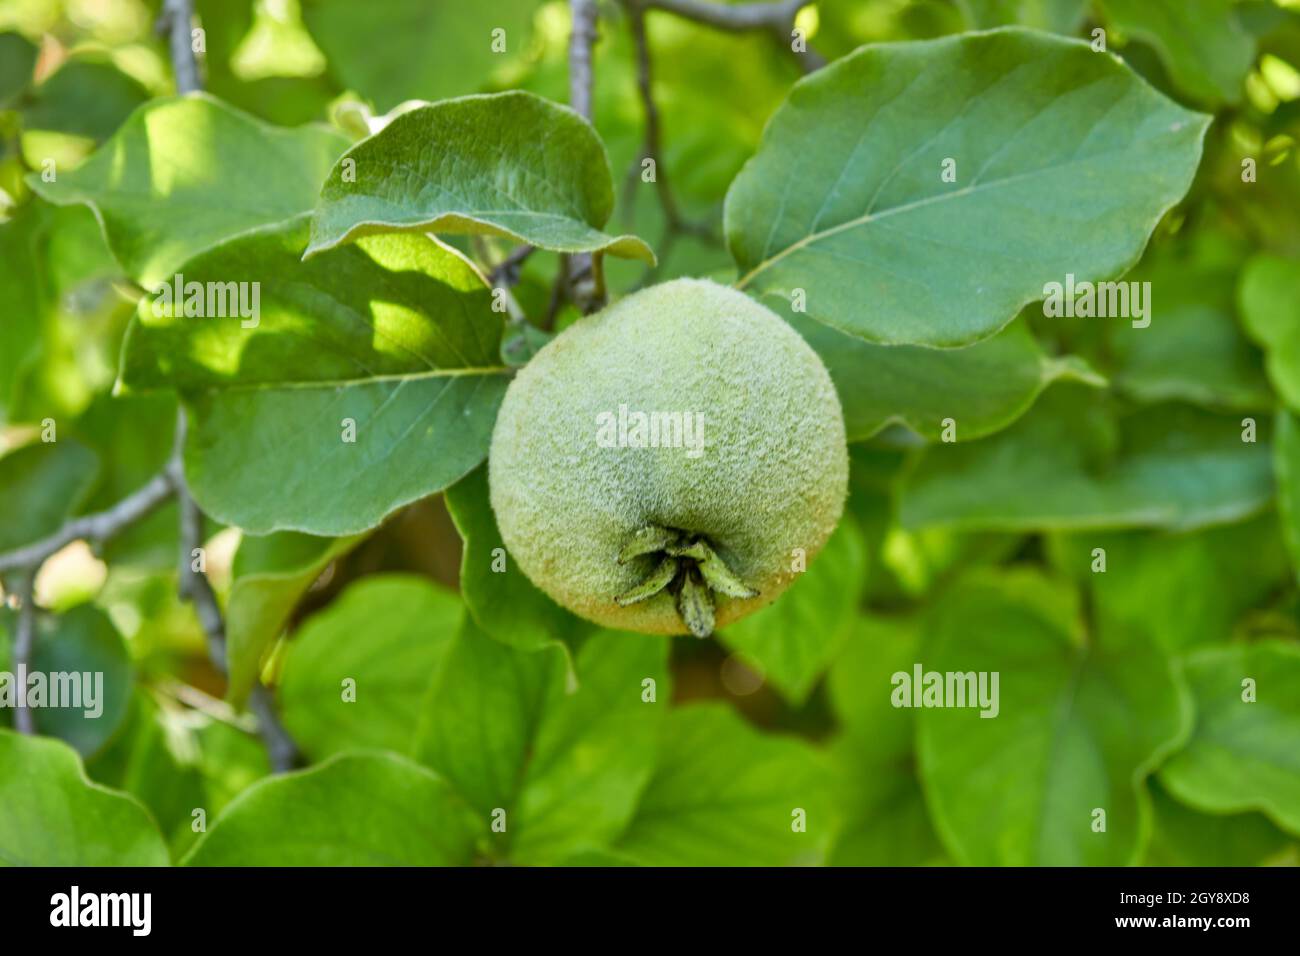 A ripening green quince on a tree branch close up. The unripe crop is growing. A shaggy apple on a green tree. Selective focus for a fruit. Stock Photo